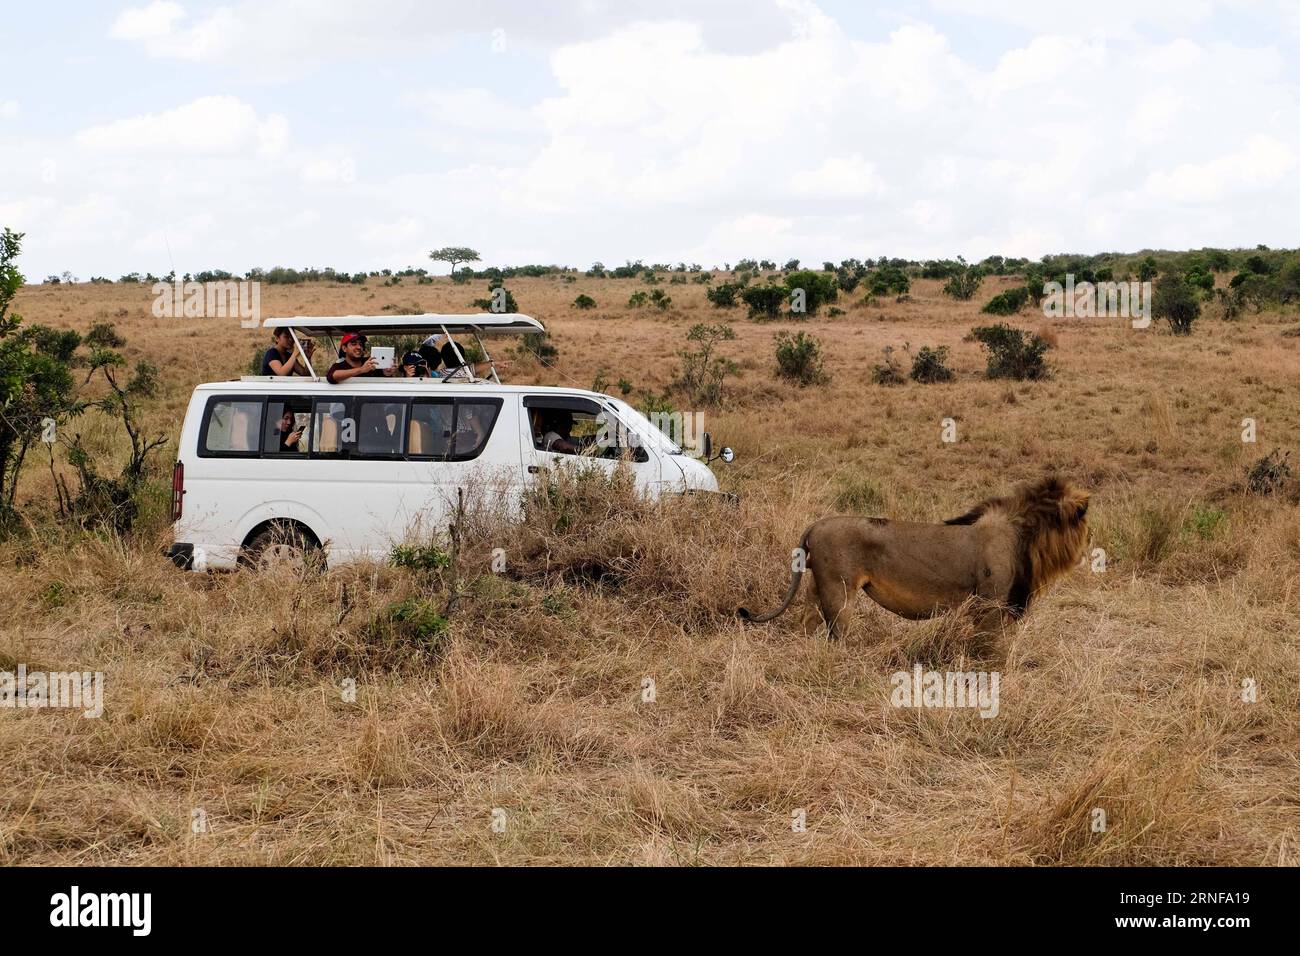 (160727) -- NAIROBI, July 27, 2016 -- Tourists take photos of a lion at Maasai Mara National Reserve, Kenya, July 24, 2016. Kenya has recorded minimal wildlife attacks on humans inside parks and game reserves thanks to solid measures that include enhanced vigilance and public outreach, an official said on Tuesday. ) (wjd) KENYA-NAIROBI-WILDLIFE ATTACK-PREVENTION PanxSiwei PUBLICATIONxNOTxINxCHN   160727 Nairobi July 27 2016 tourists Take Photos of a Lion AT Maasai Mara National Reserve Kenya July 24 2016 Kenya has Recorded Low Wildlife Attacks ON Humans Inside Parks and Game Reserves Thanks to Stock Photo